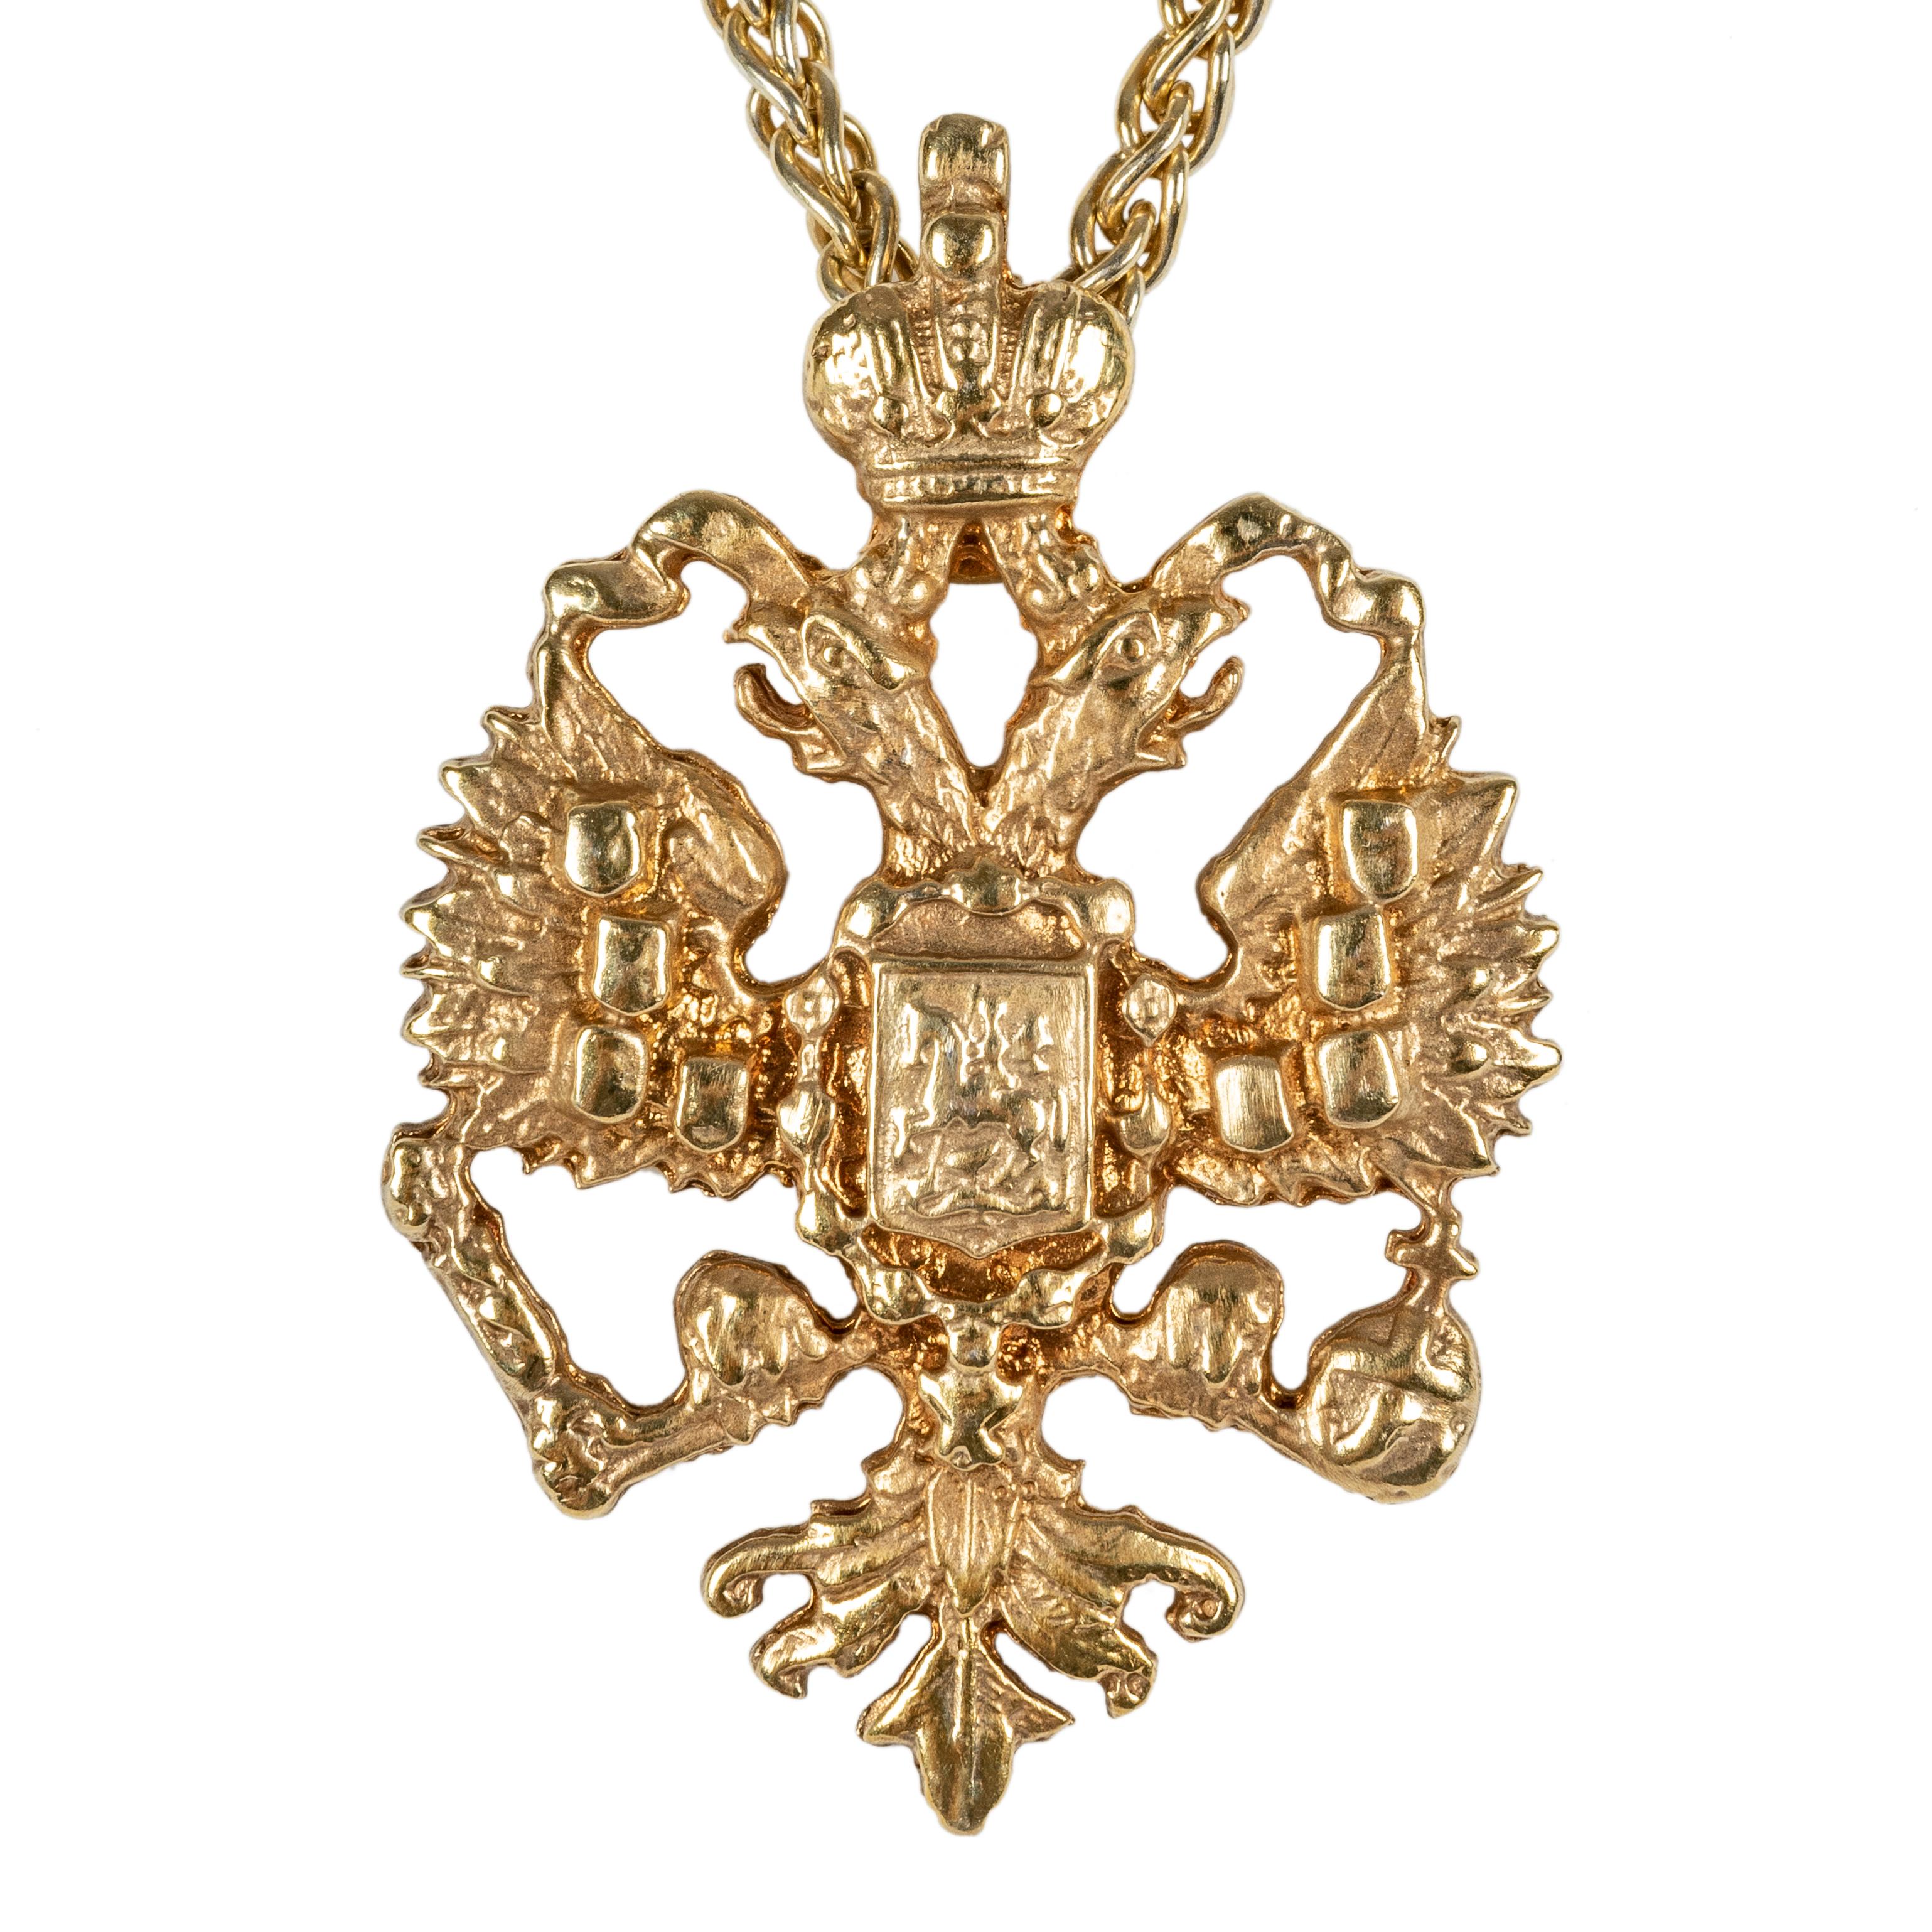 A Russian Imperial Eagle Pendant inspired by the official Romanov Imperial Warrant in gilded silver. A faithful rendition of Imperial Russia’s most enduring symbol, this version of the eagle was introduced under Tsar Alexander III (1881-94). The